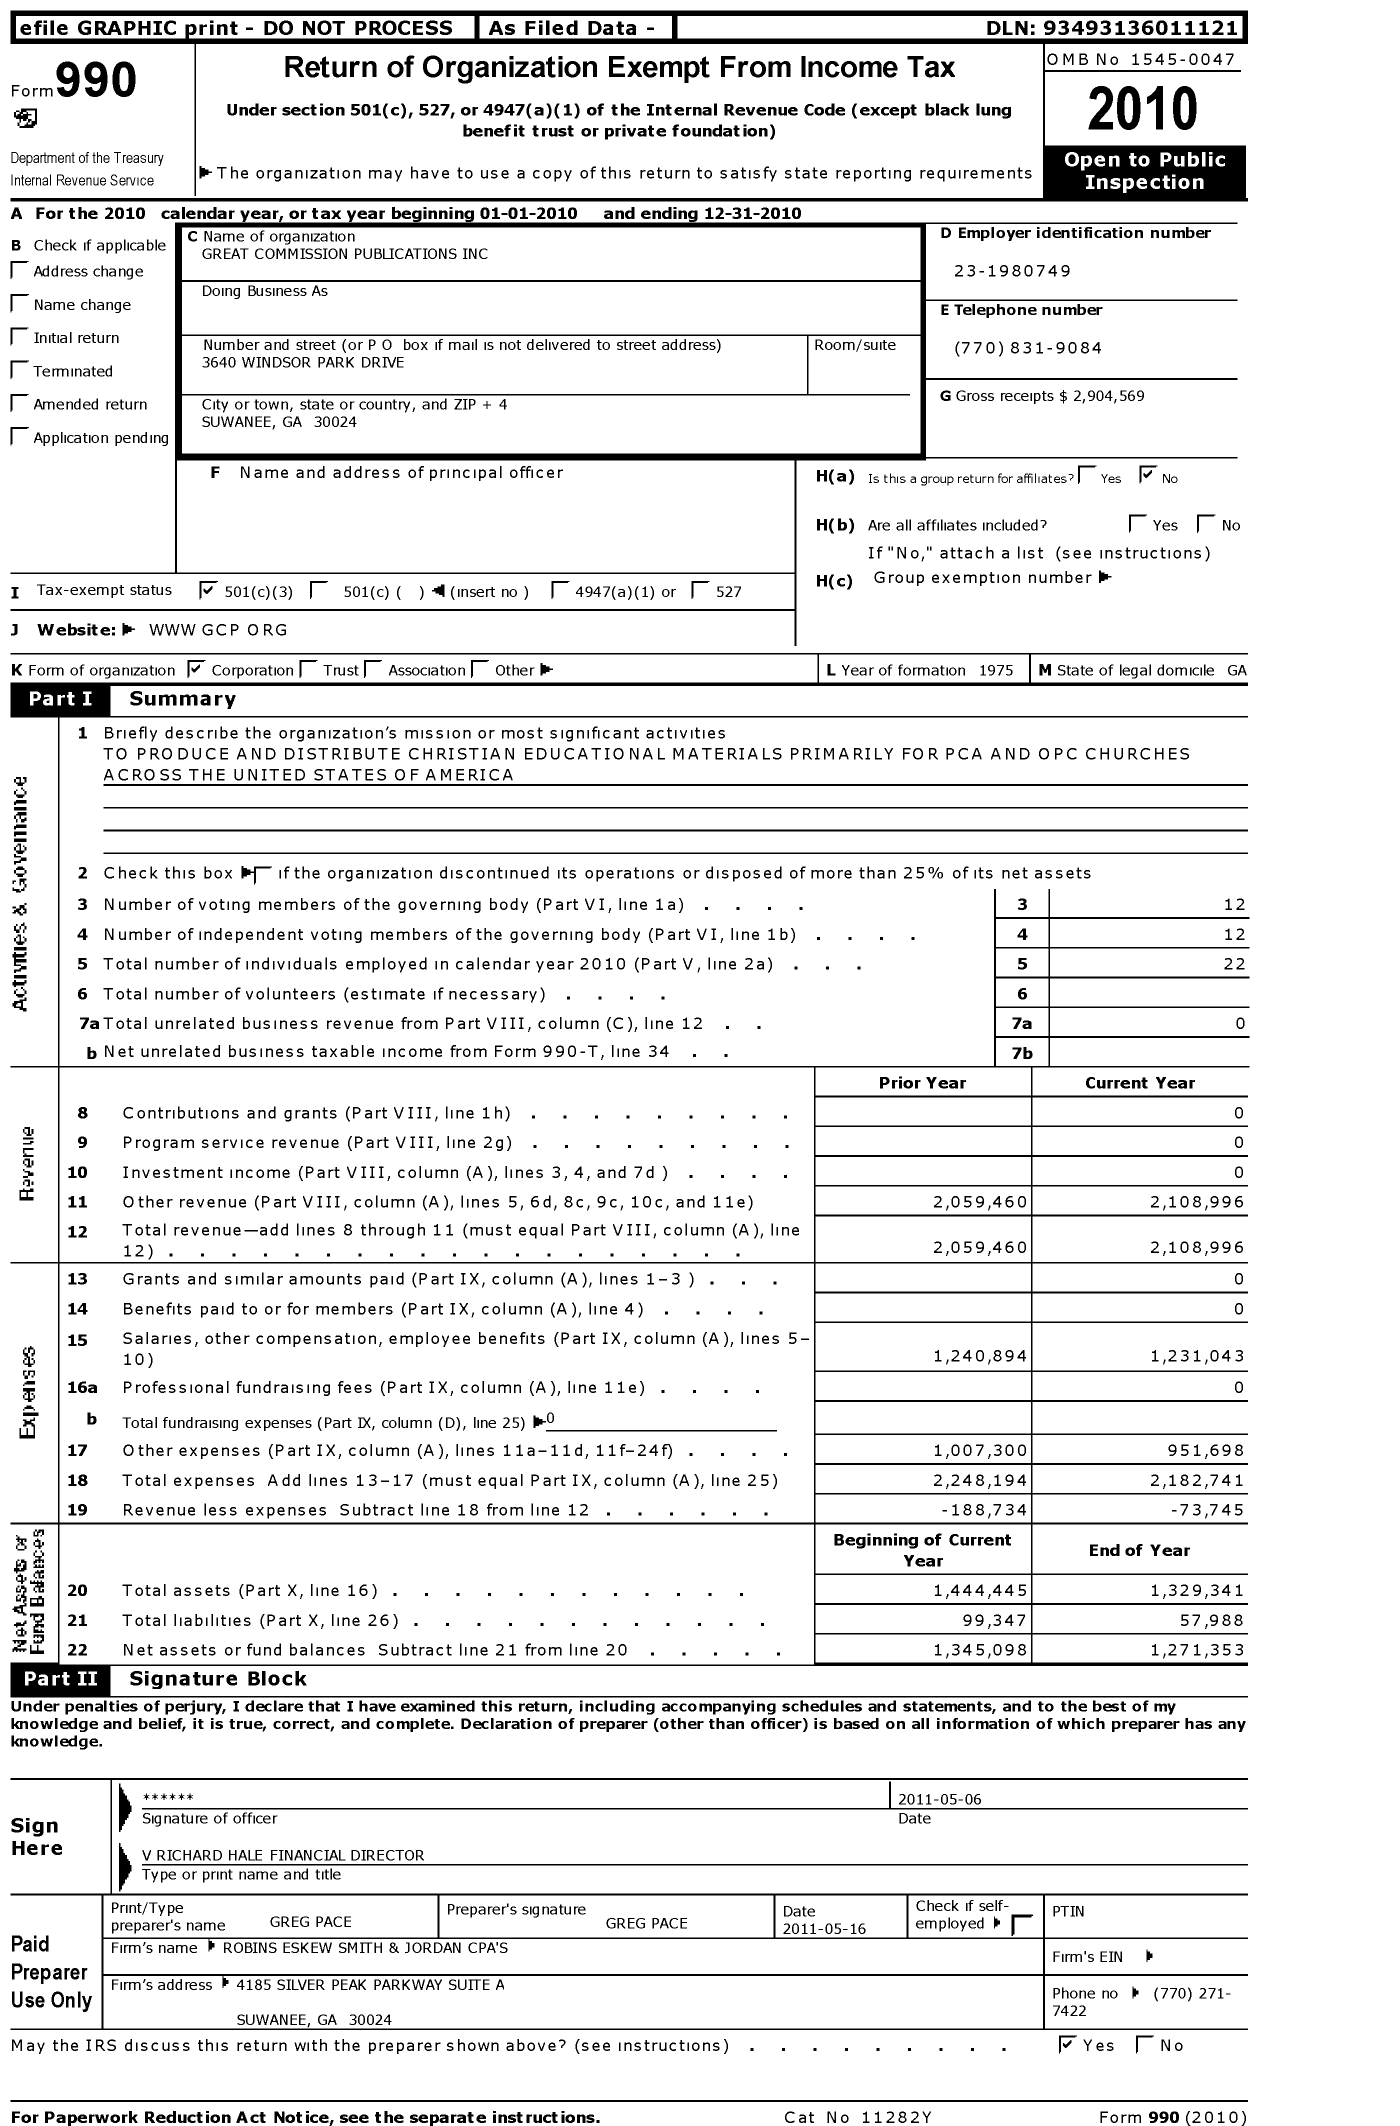 Image of first page of 2010 Form 990 for Great Commission Publications (GCP)